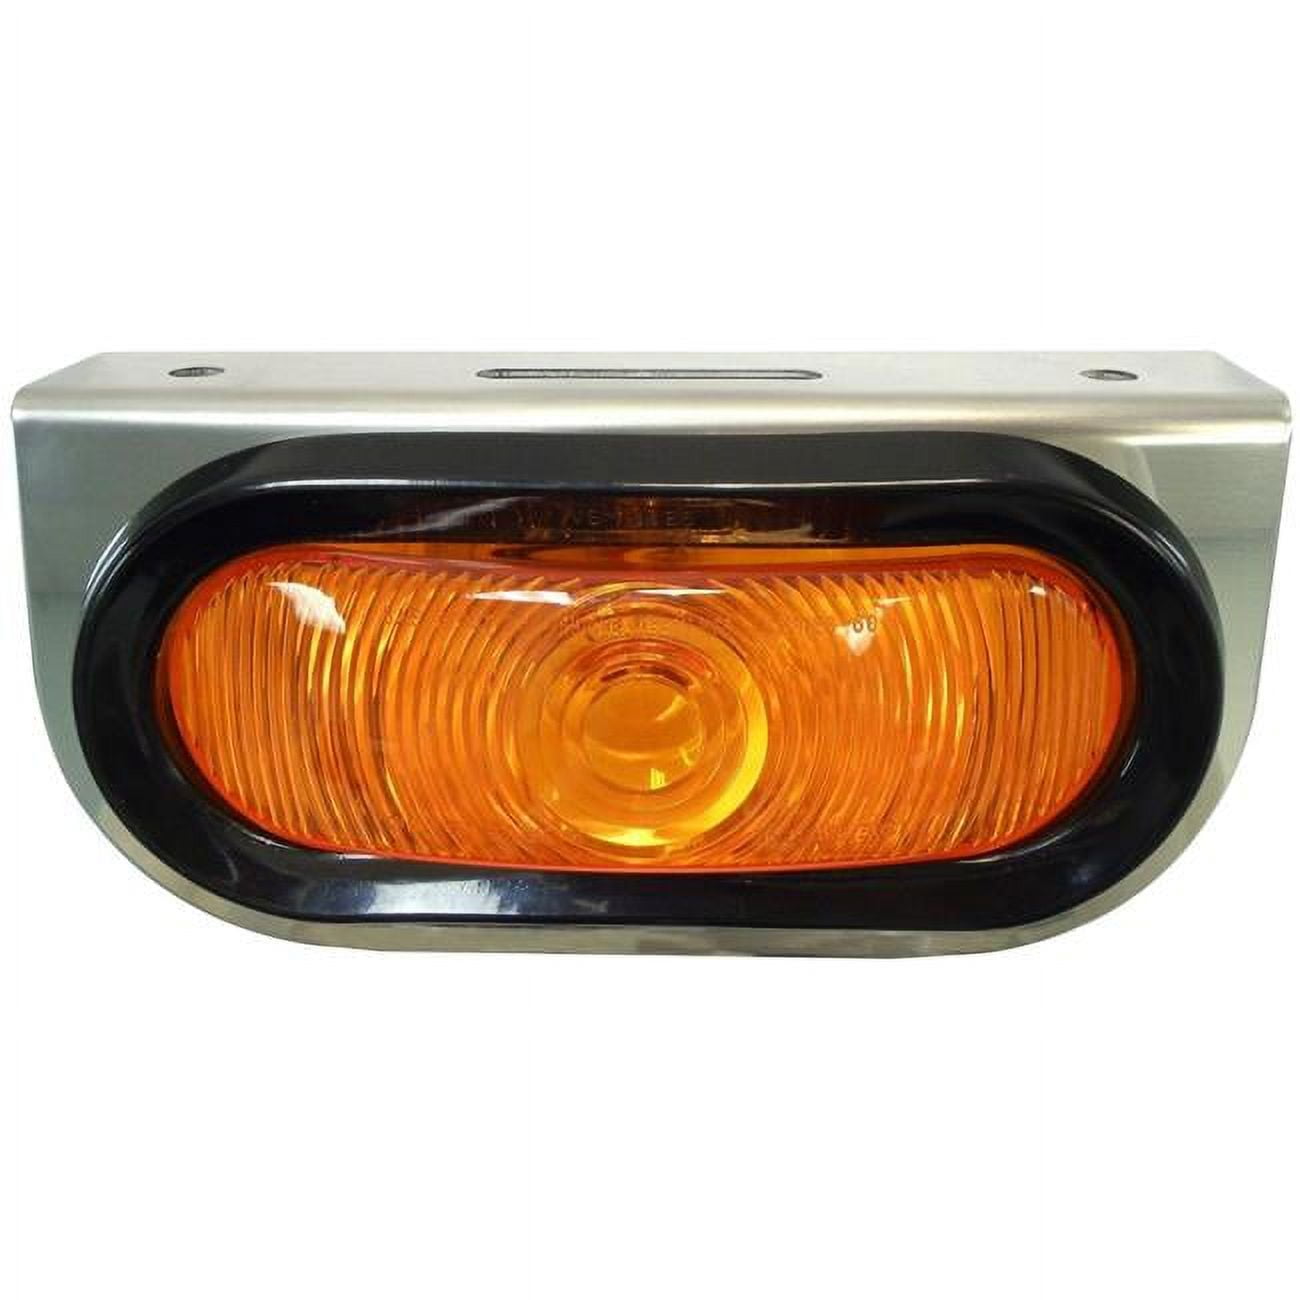 Picture of Barjan 04820402 6.5 in. SS Mount with Oval Amber Light & Wiring Harness